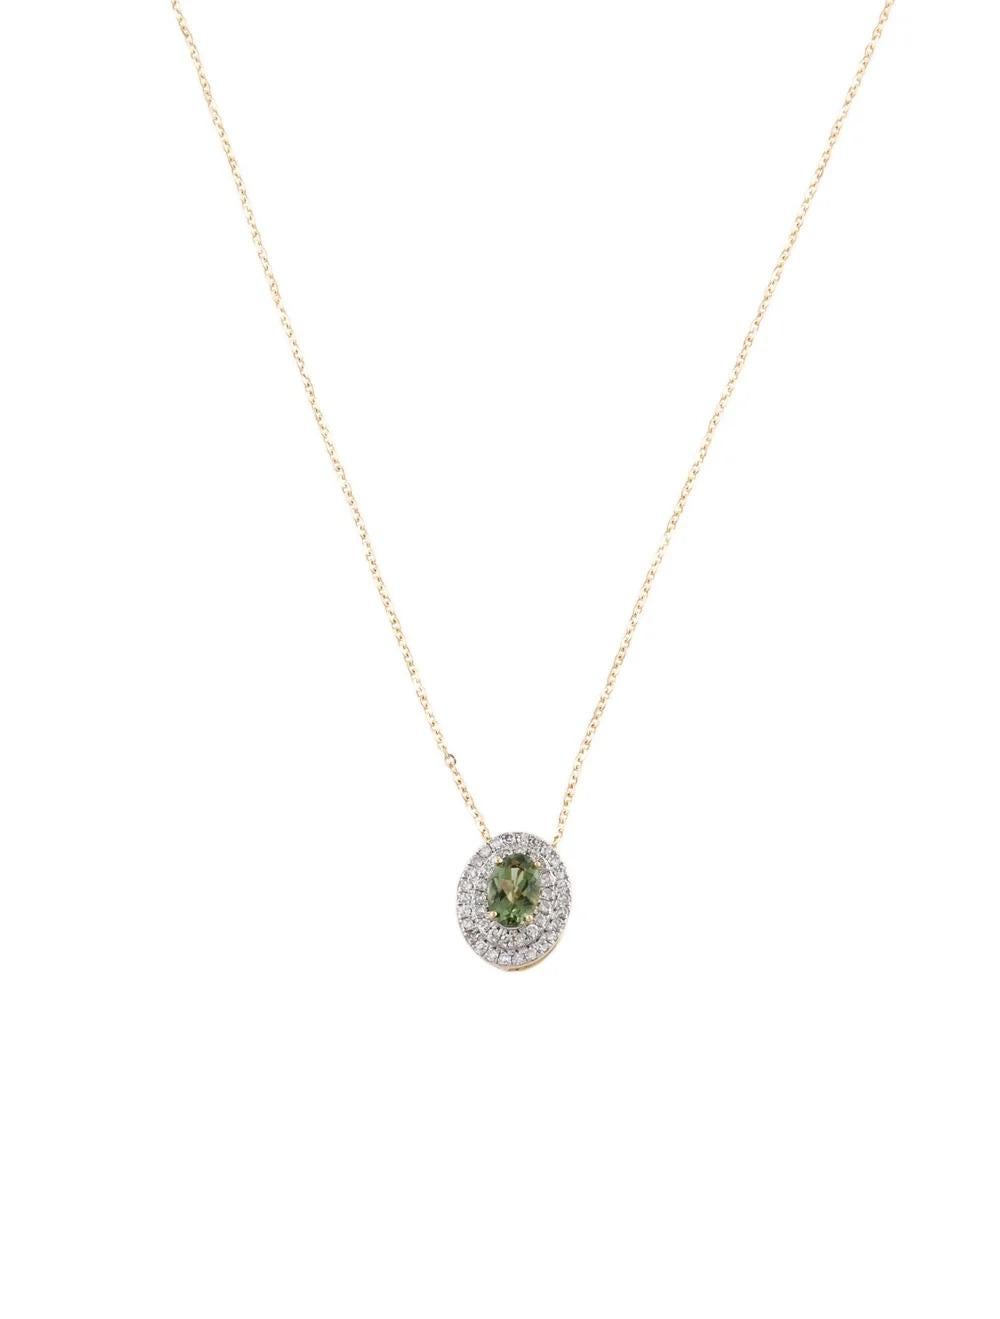 Elevate your style with this exquisite 14K Yellow Gold pendant necklace, featuring a captivating 0.49 Carat Faceted Oval Tourmaline and shimmering diamond accents.

SPECIFICATIONS:

* Metal Type: 14K Yellow Gold
* Total Item Weight: 2.5g
* Length: